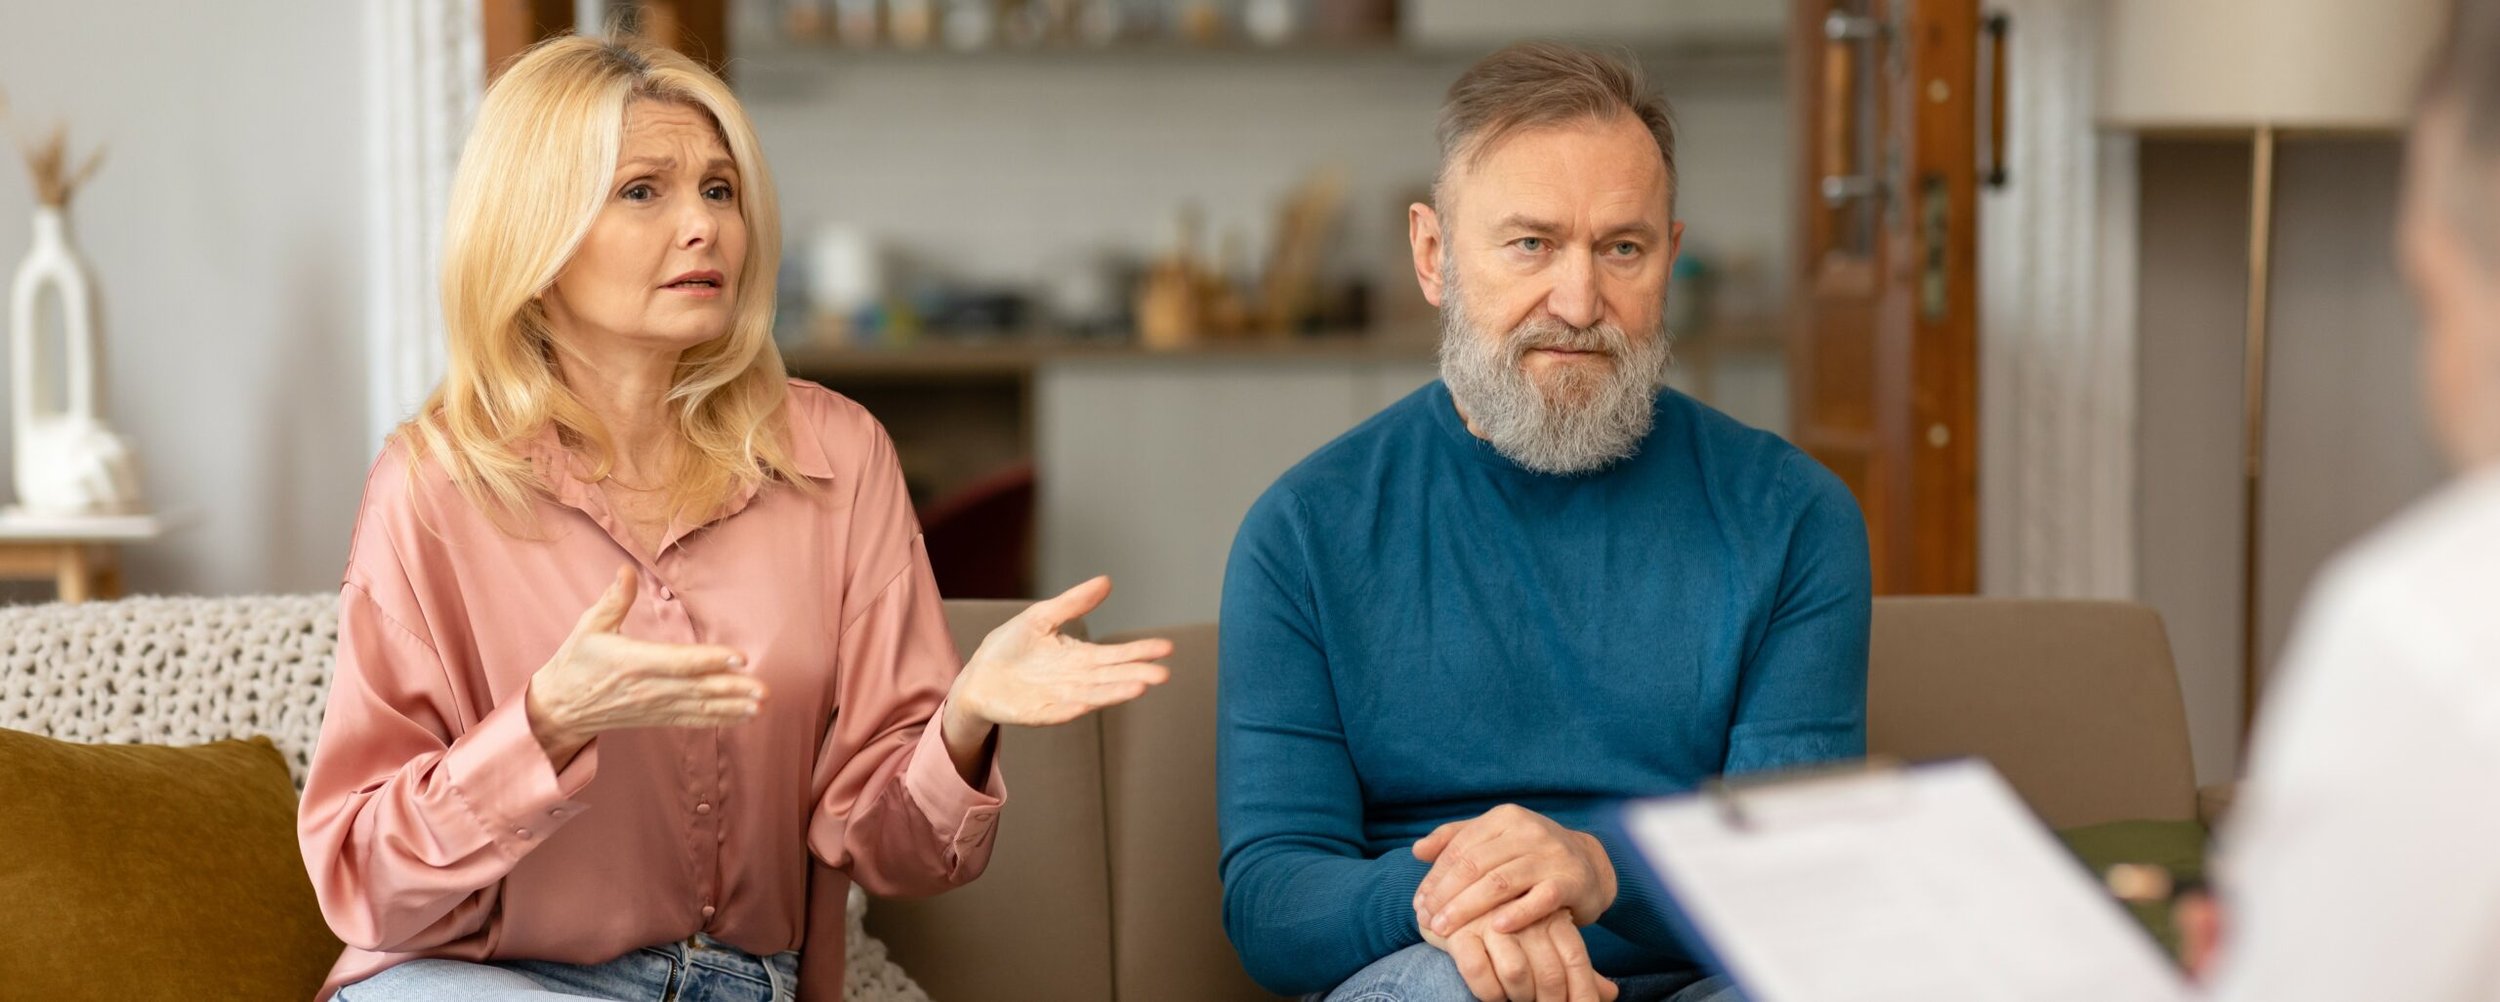 An-unhappy-middle-aged-couple-sits-on-a-couch-talking-to-their-therapist-crop-2-scaled.jpg